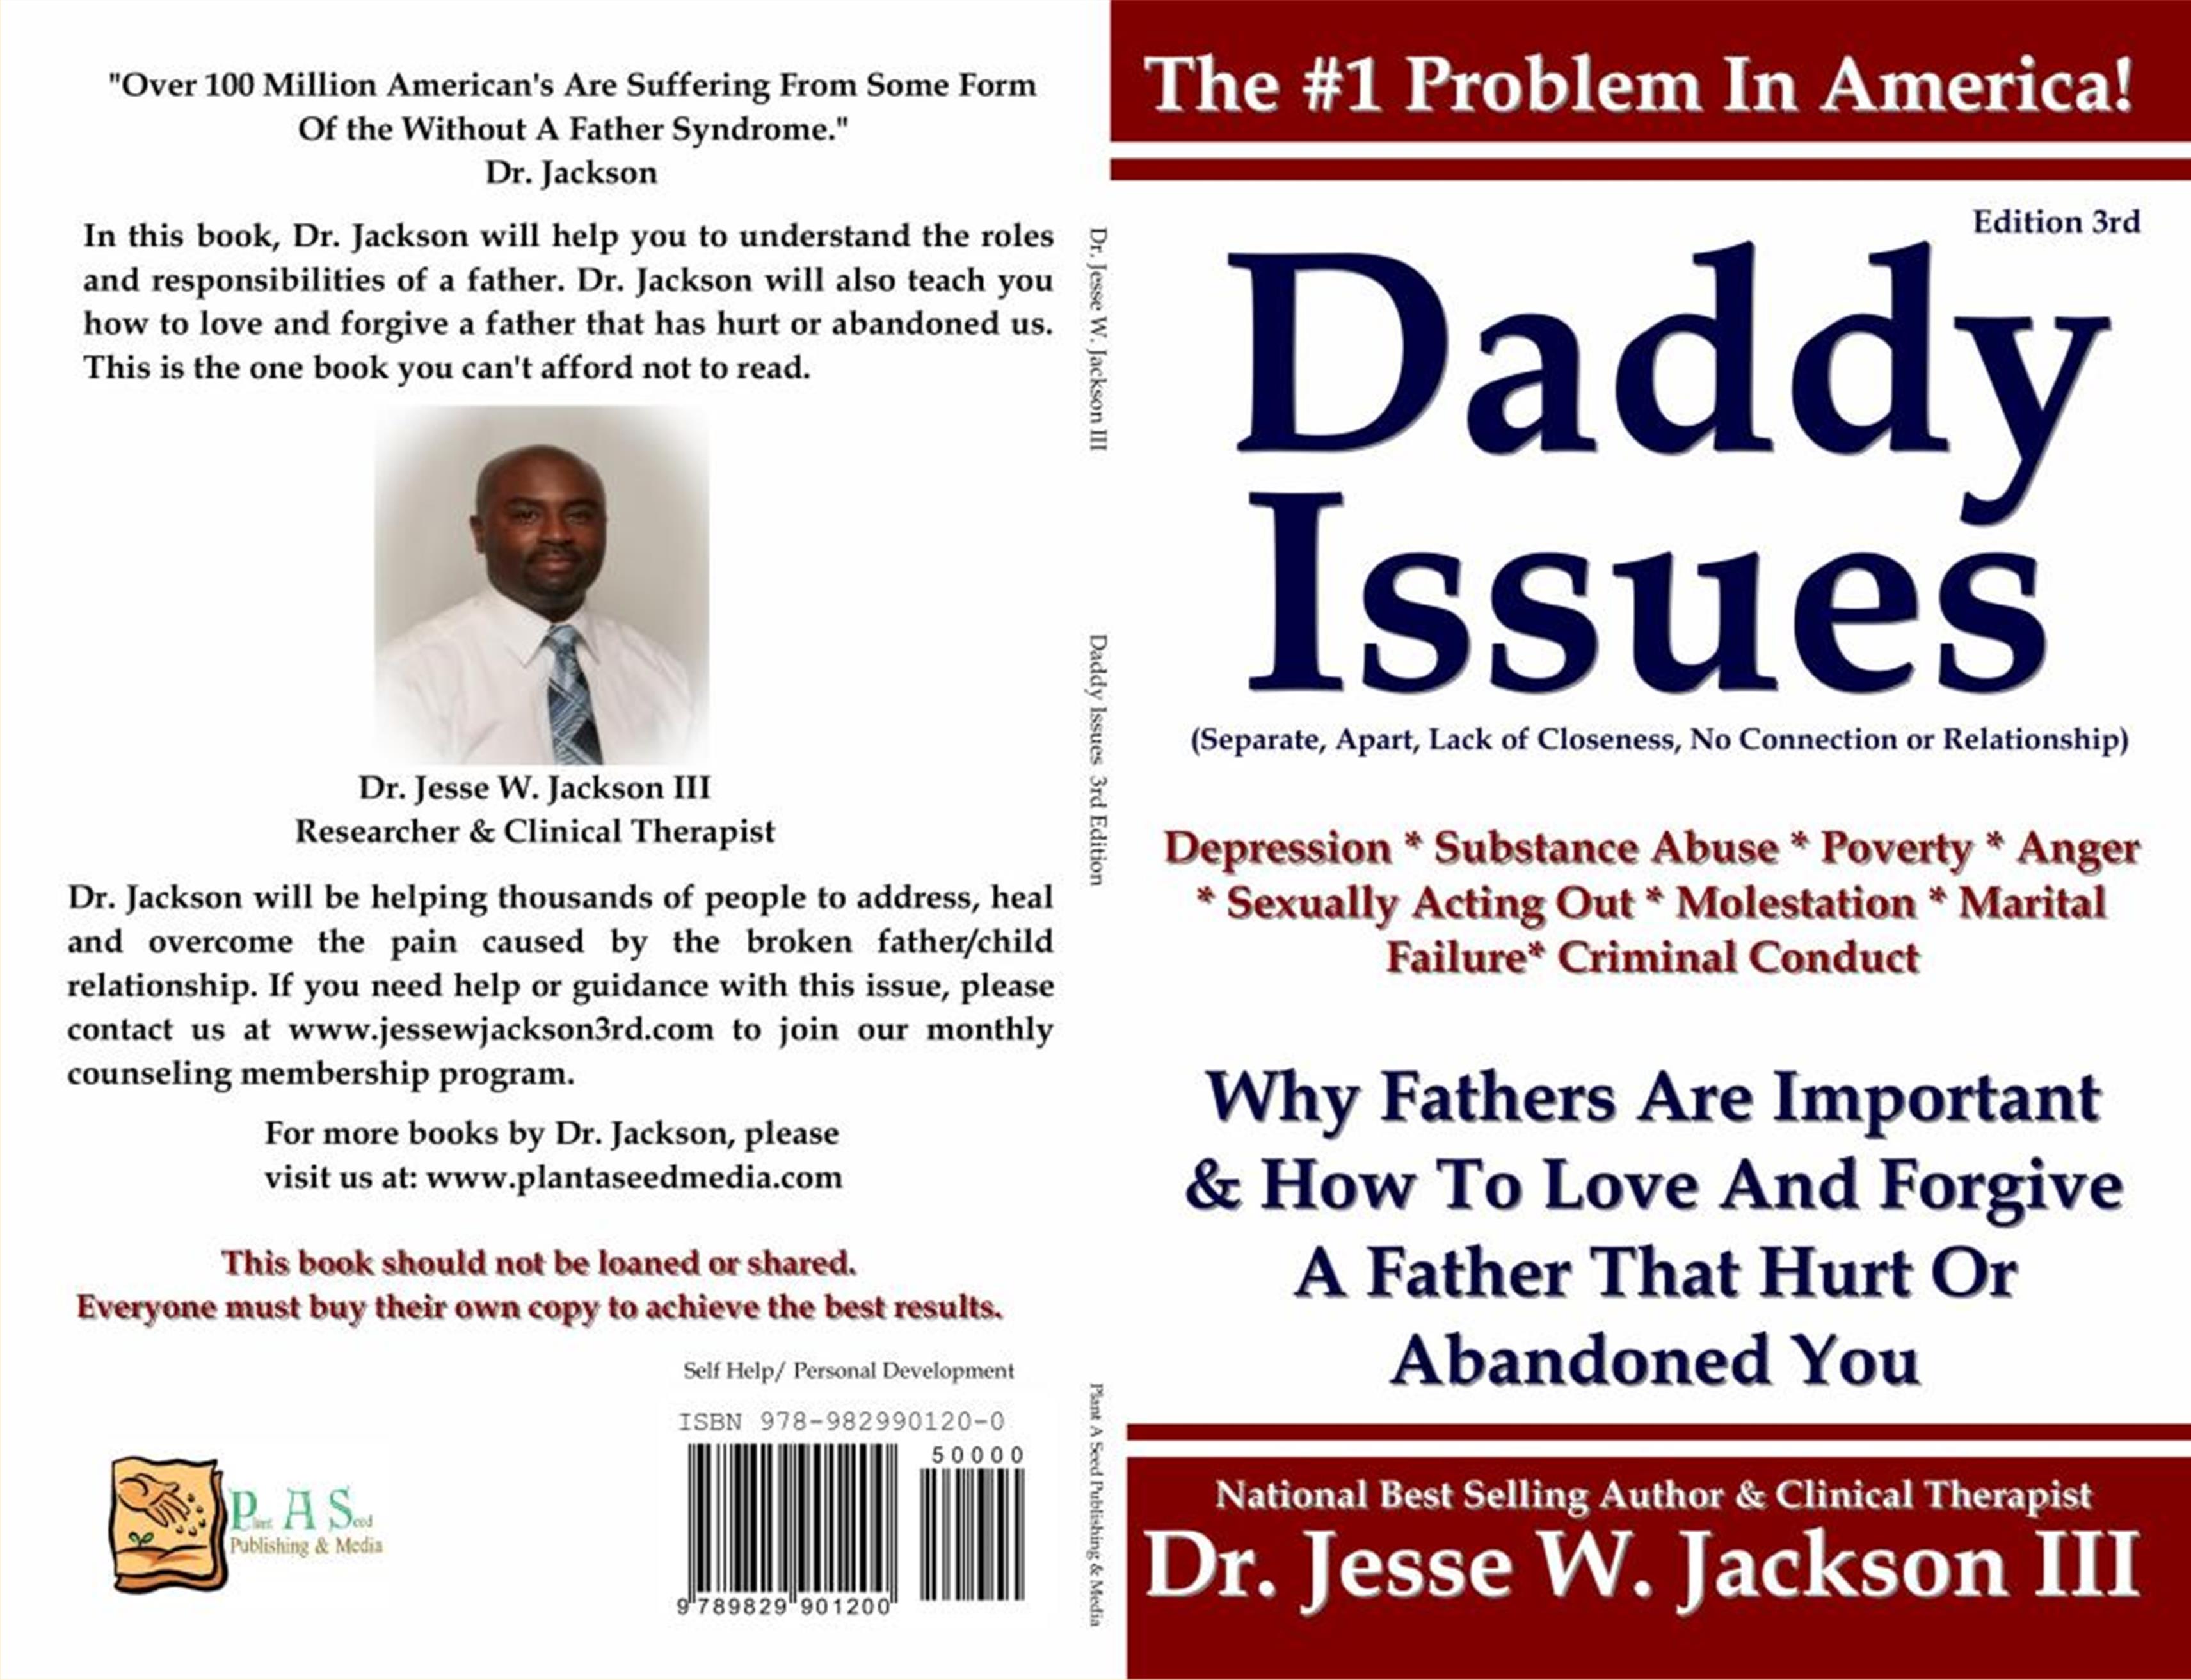 Daddy Issues: Why Fathers Are Important & How To Love And Forgive A Father That Hurt Or Abandoned You cover image